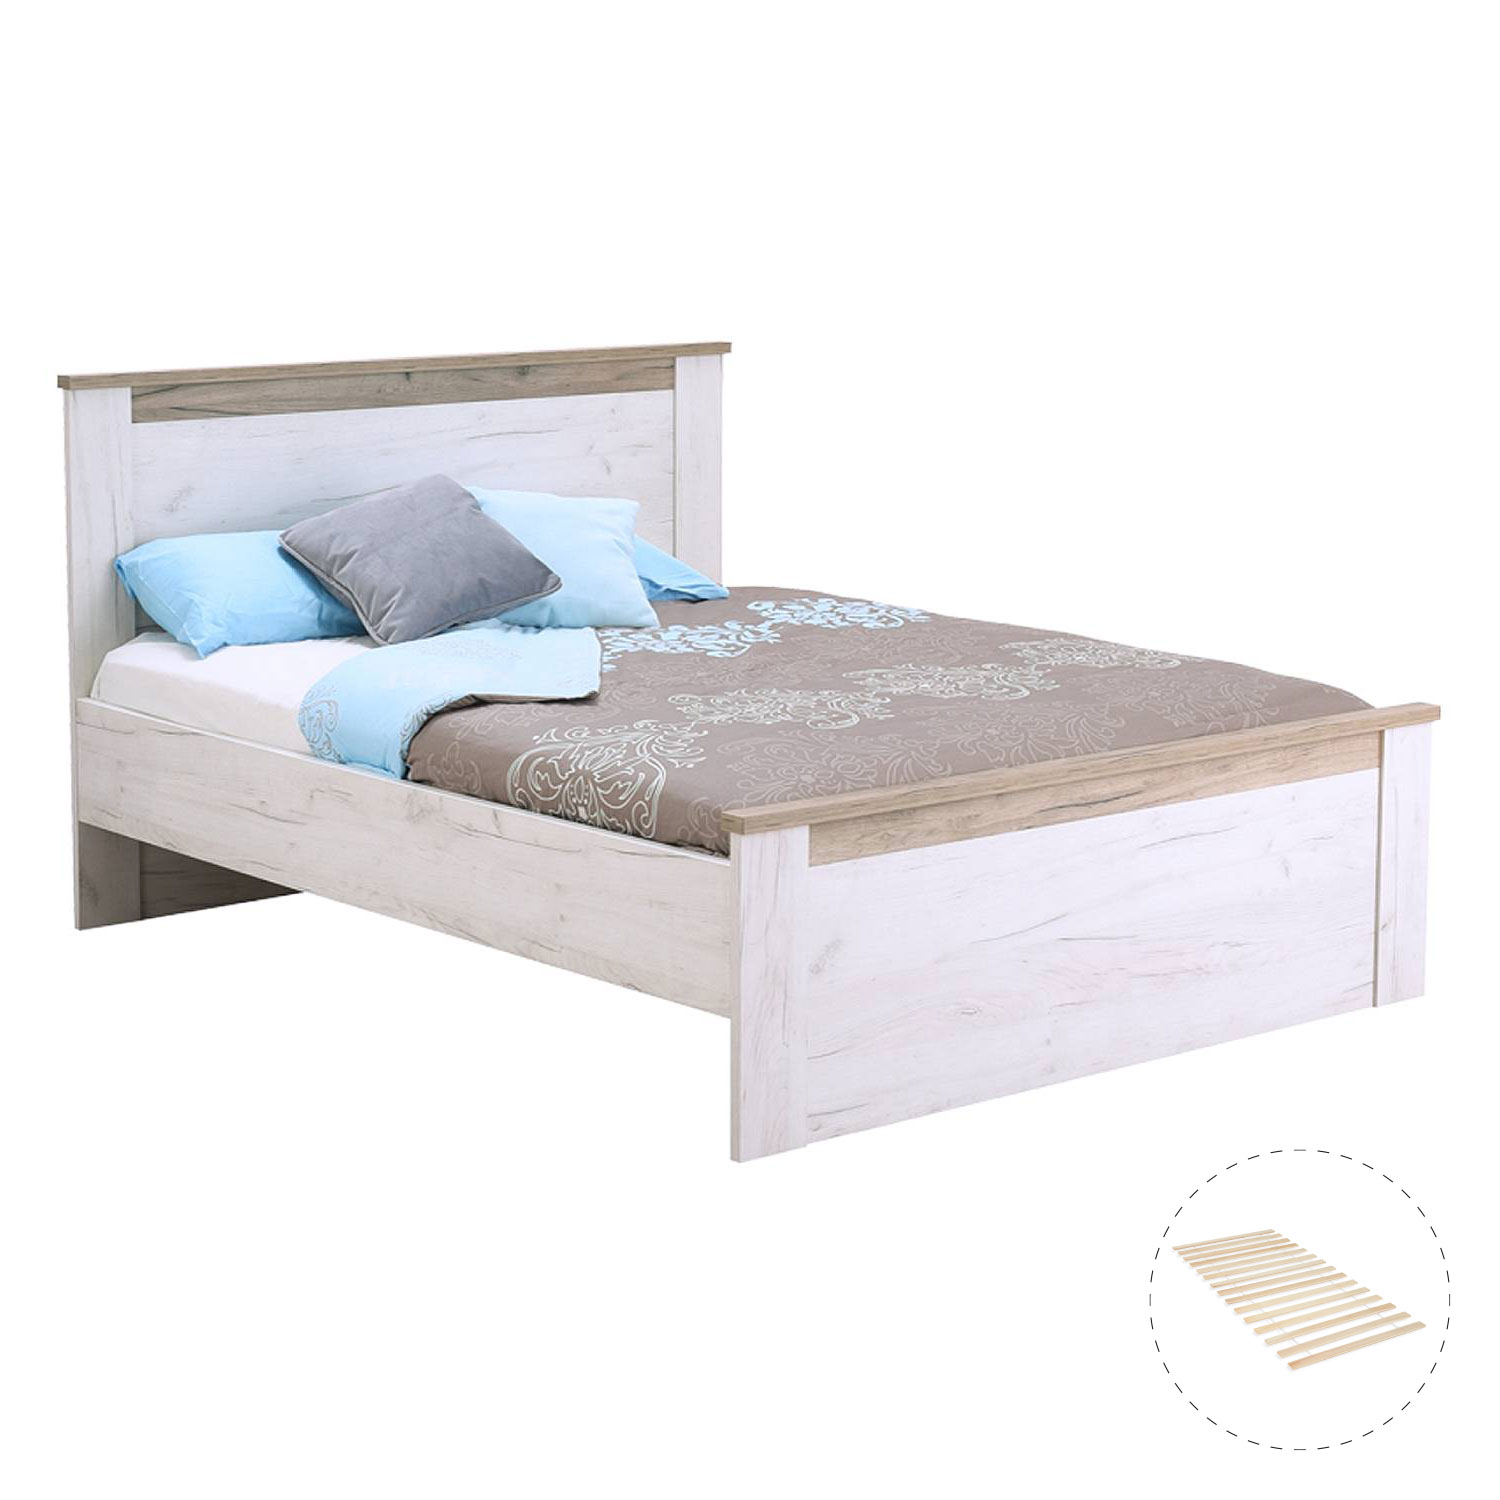 Wooden Double Queen Size Bed Frame 160x200 cm with Slats Oak White Grey Vintage